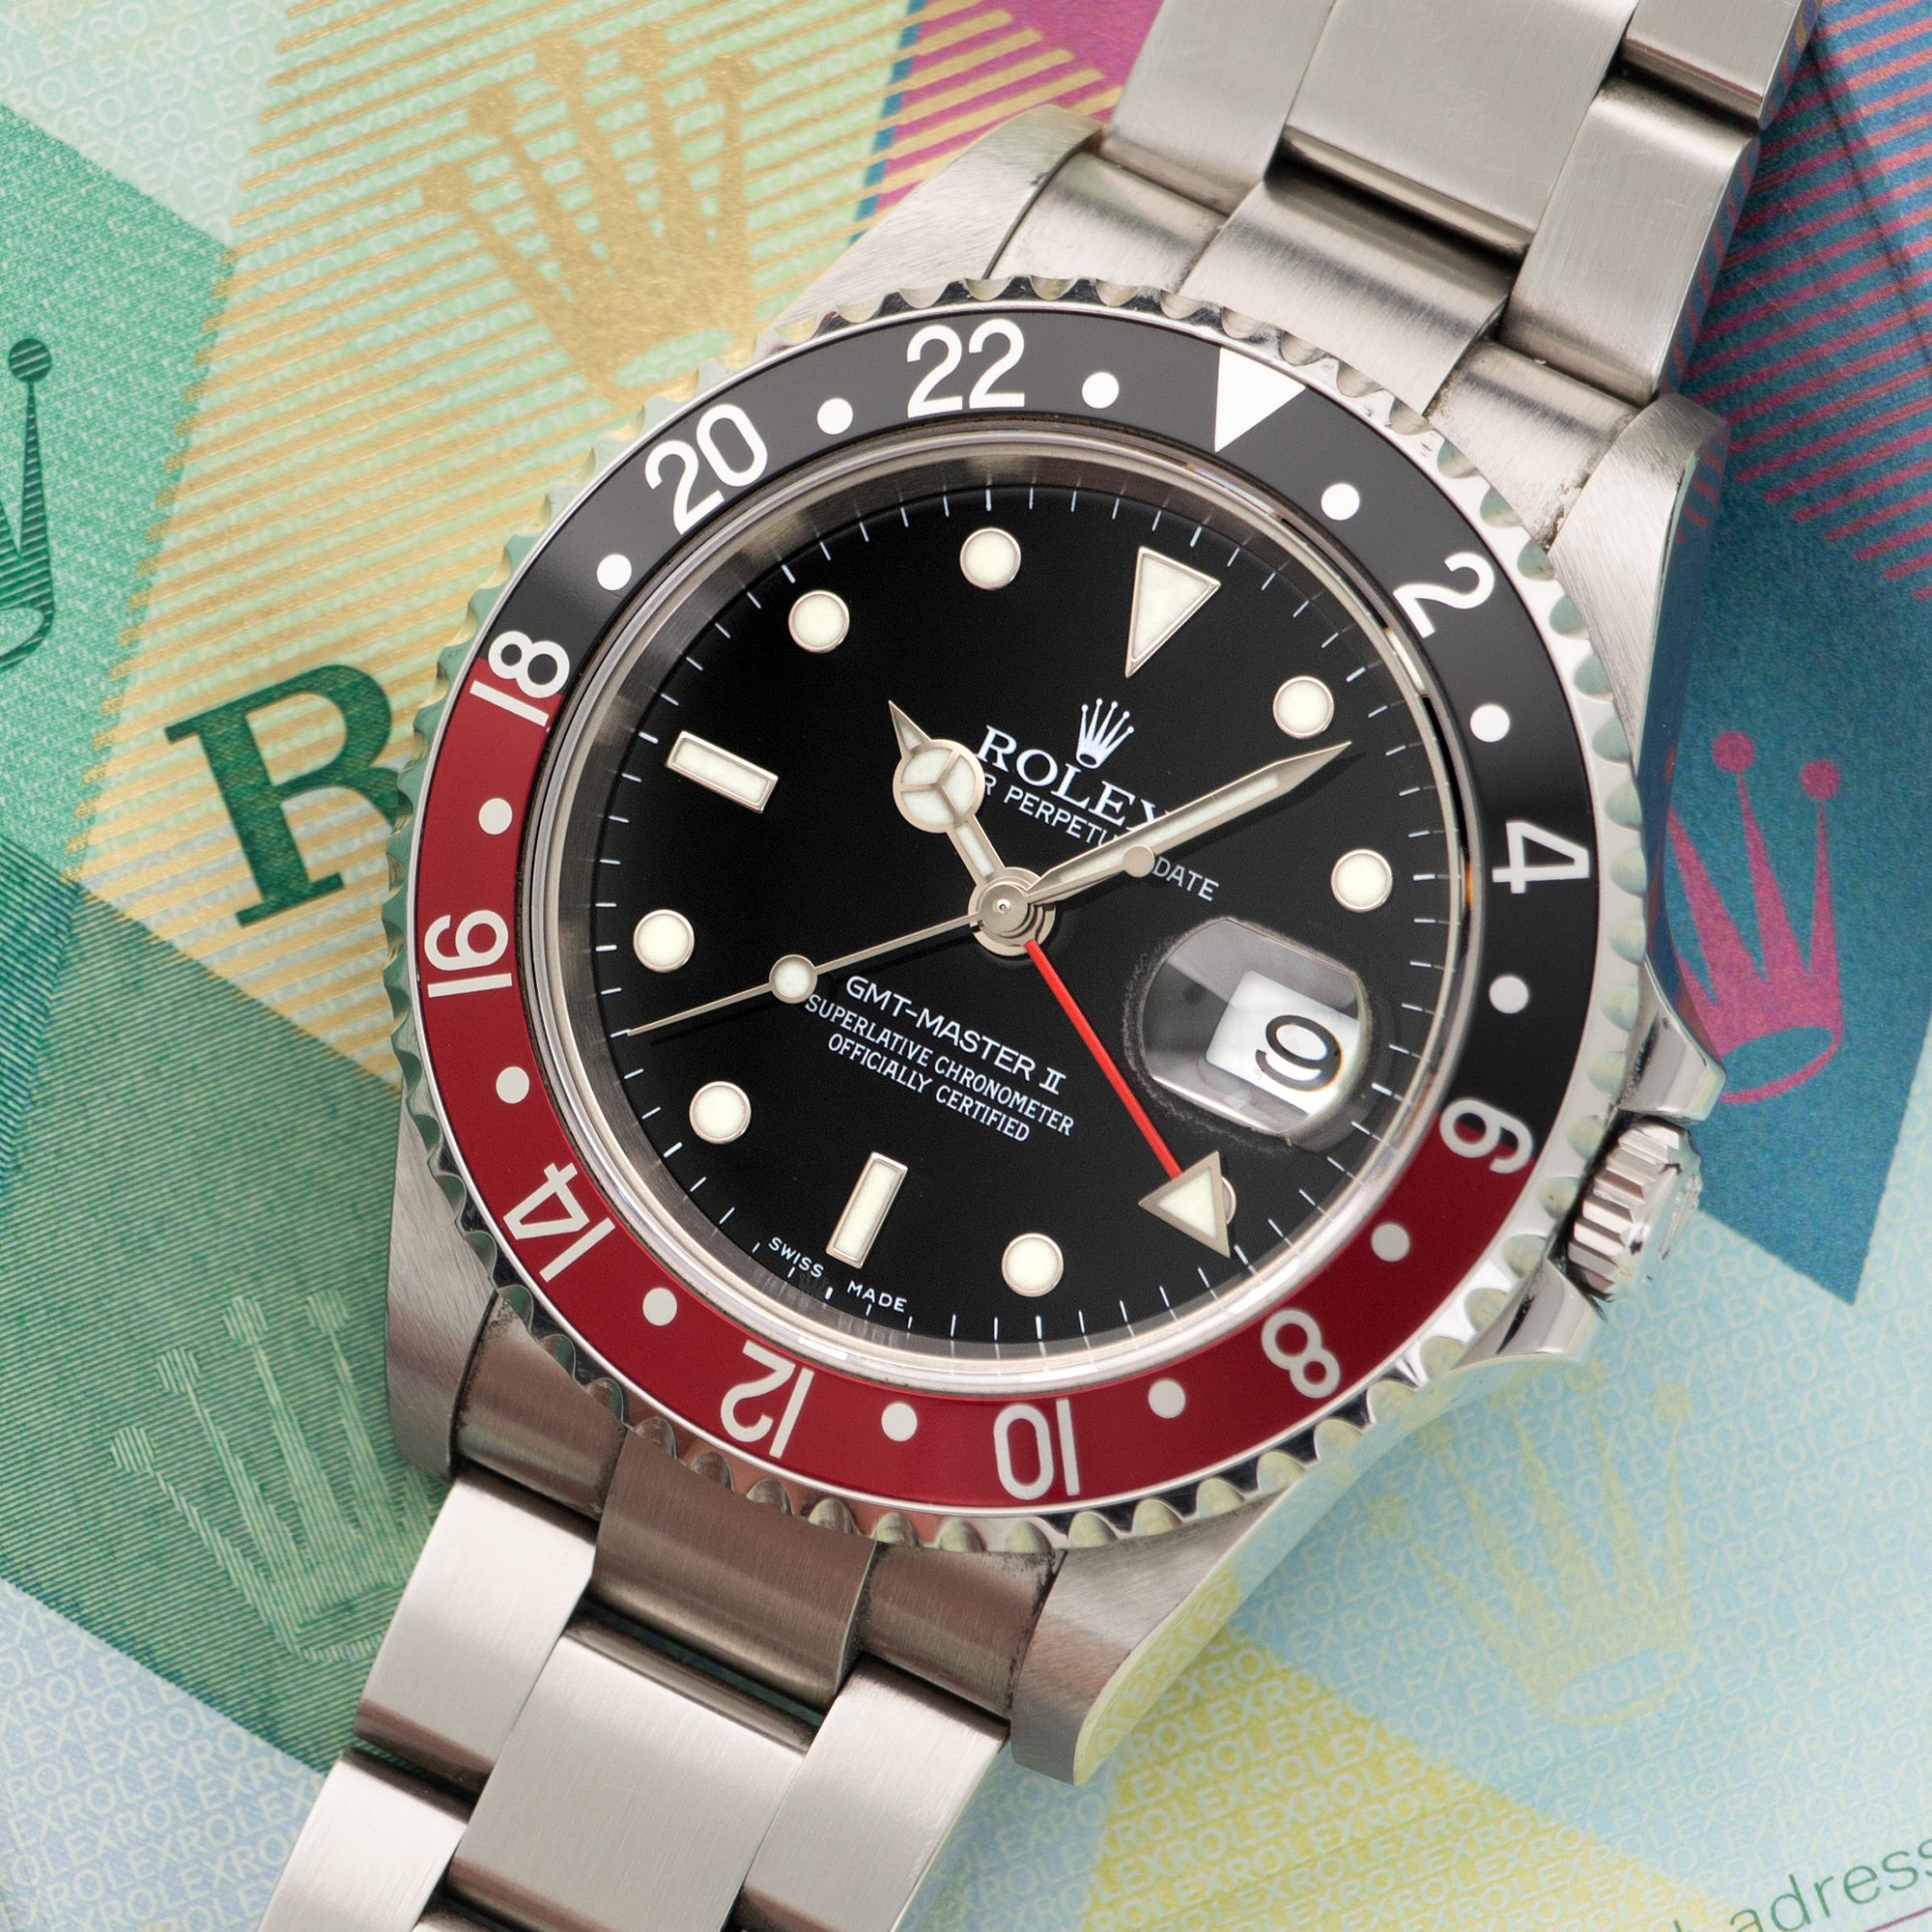 Rolex - Rolex GMT-Master II Coke Watch Ref. 16710 with Original Box and Papers - The Keystone Watches